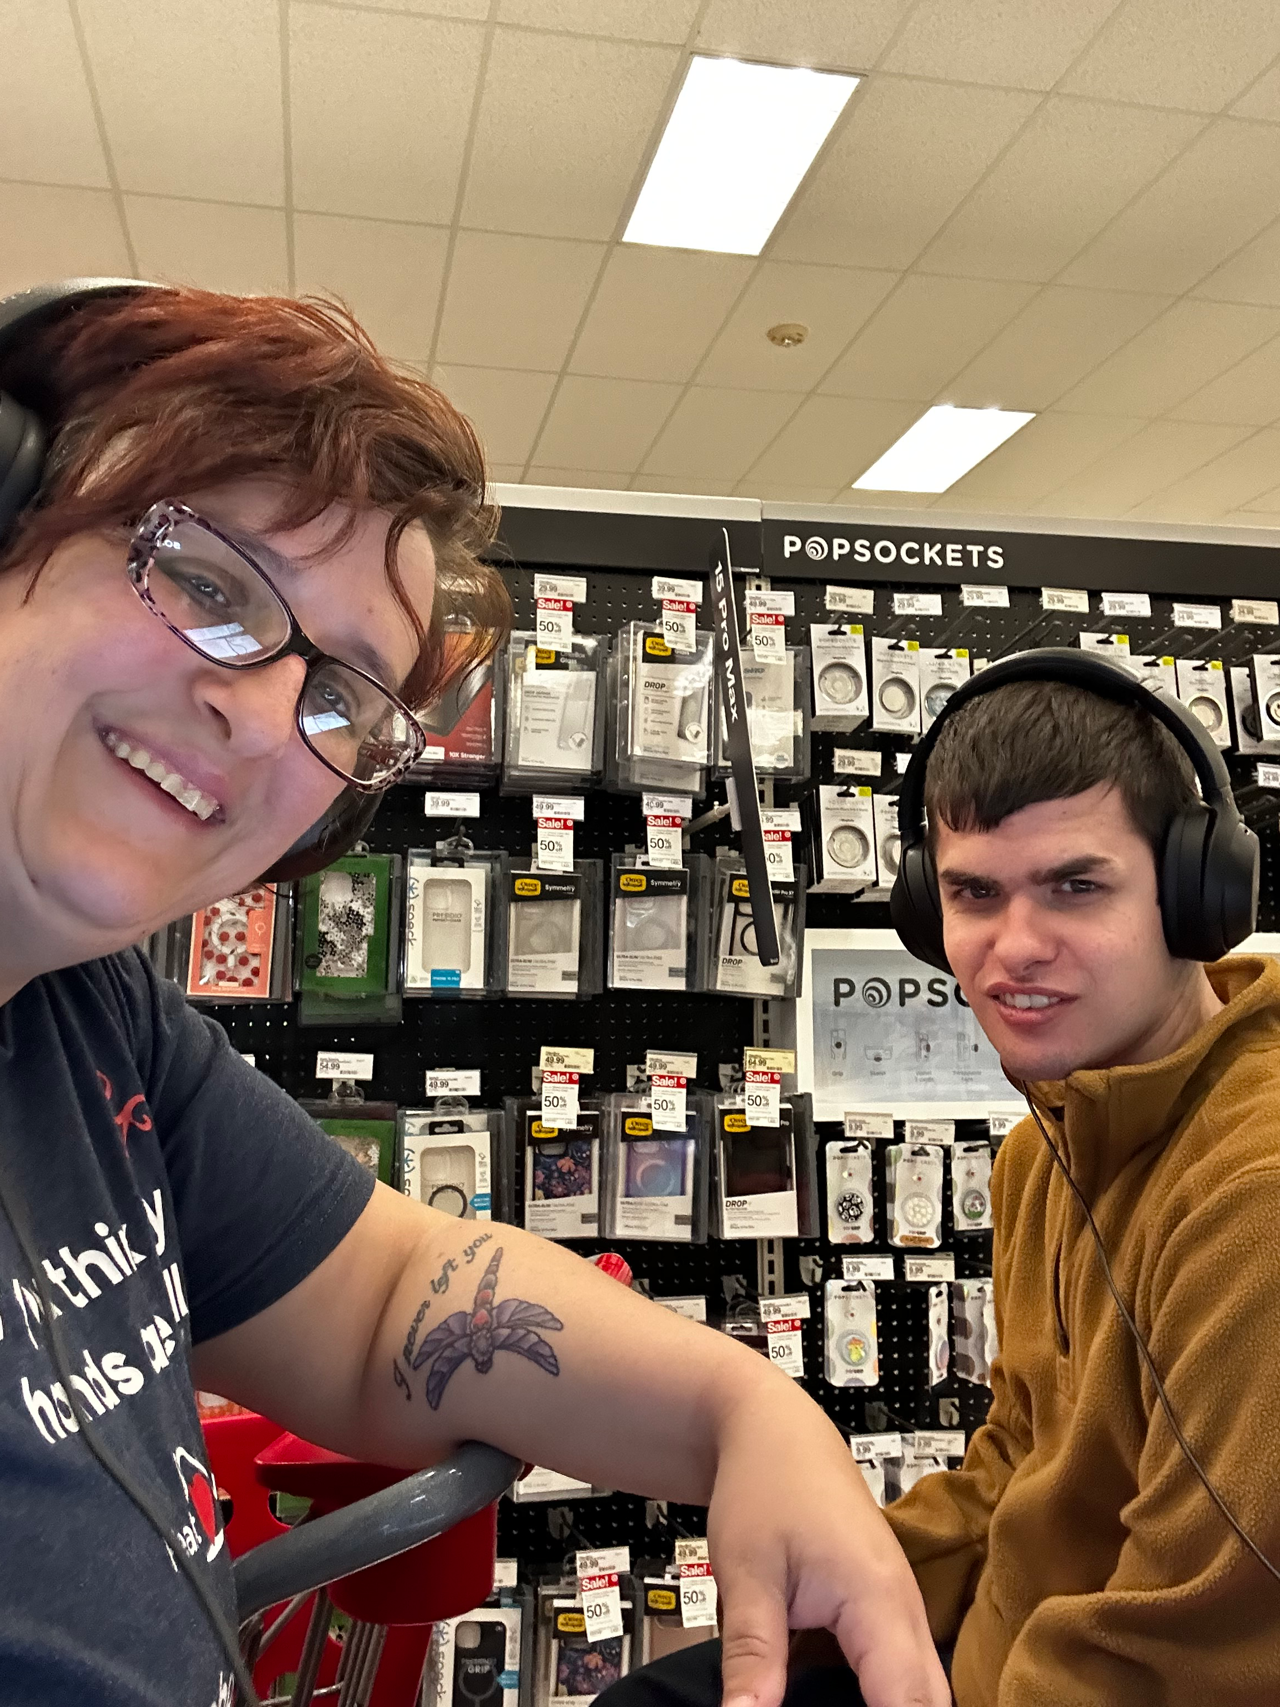 A smiling woman and a young man are posing for a selfie in what appears to be a retail store, specifically in the electronics section. The woman, wearing glasses and a black t-shirt with a tattoo on her left arm, holds the camera. The young man, dressed in a brown jacket, is smiling slightly and looking at the camera. Behind them, a display of various phone accessories, including PopSockets, is visible, indicating they are likely in a section dedicated to mobile phone gadgets and accessories.